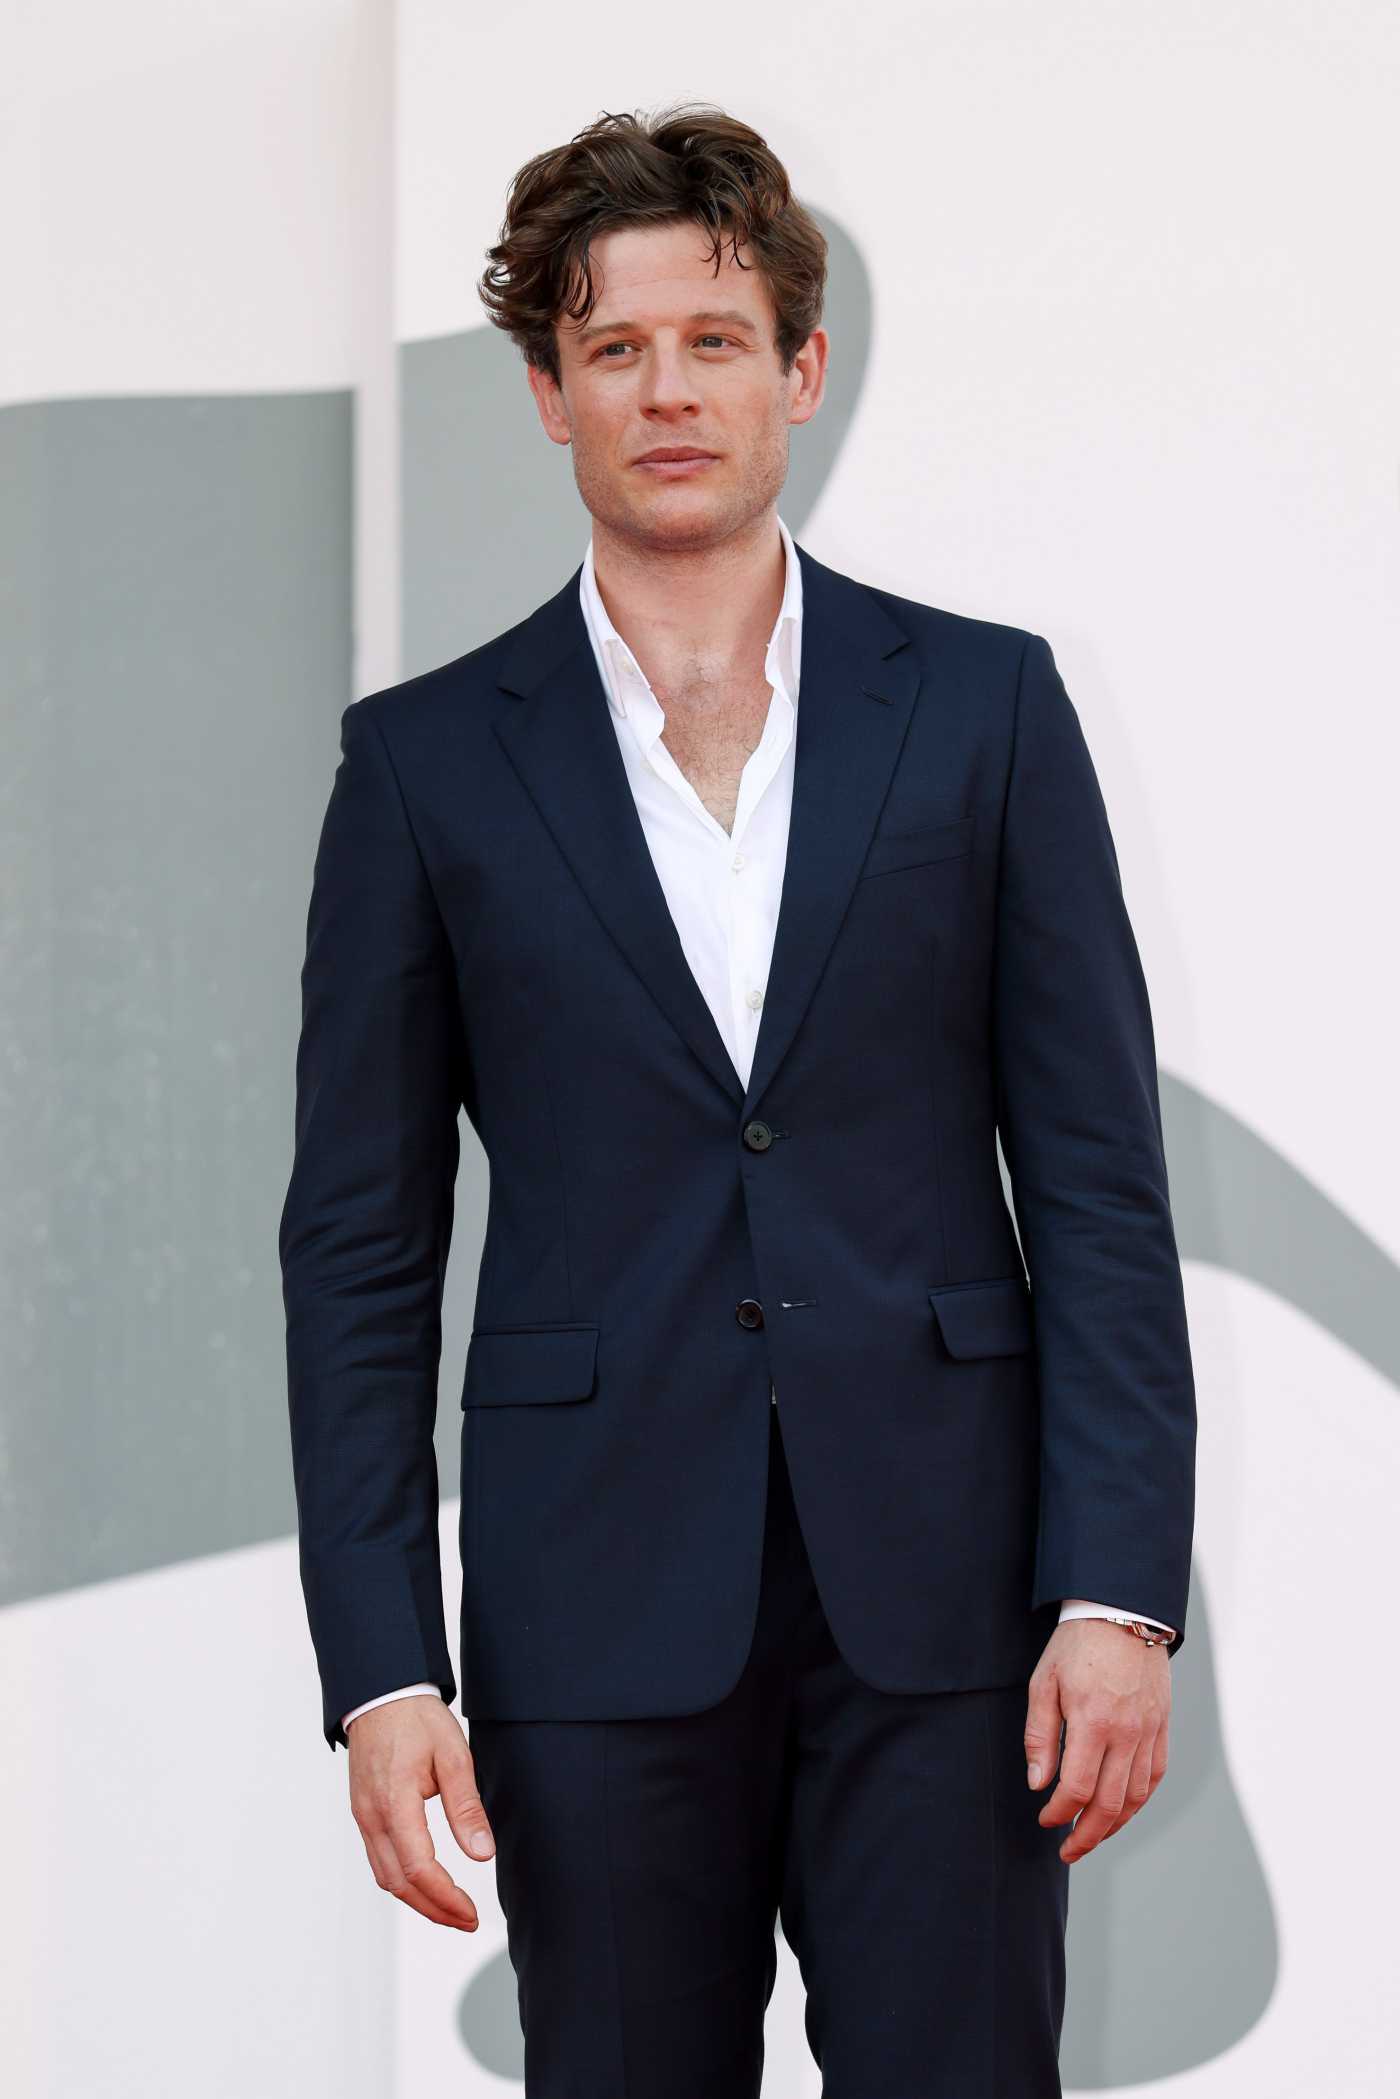 James Norton Attends the Nowhere Special Premiere During the 77th Venice Film Festival in Venice 09/10/2020